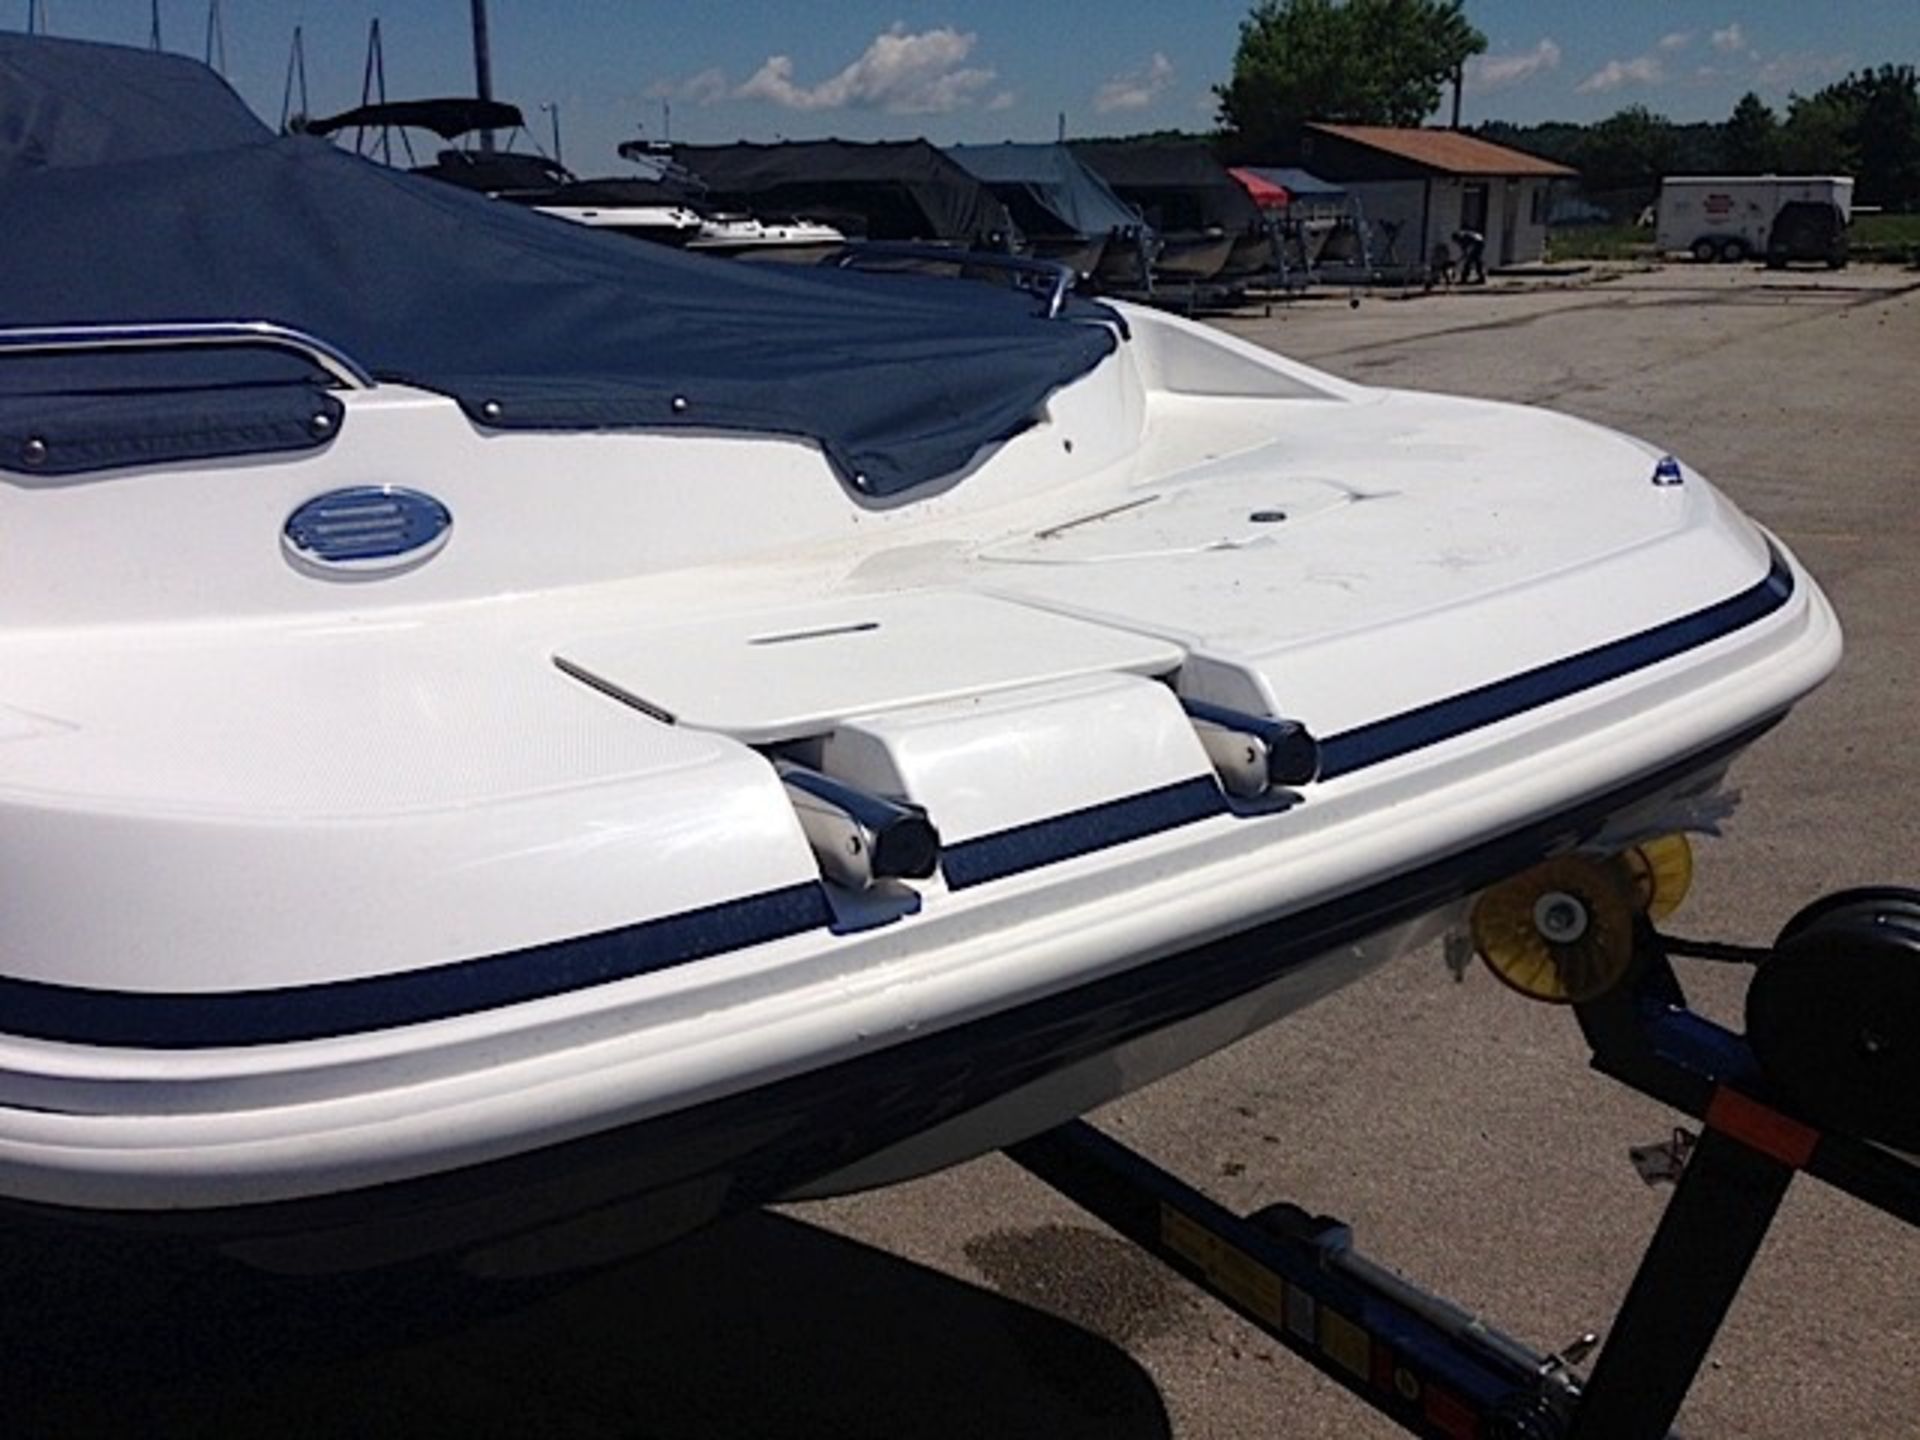 2014 HURRICAN SUNDECK (187) OUTBOARD BOAT WITH TRAILER - NEVER SEEN WATER  (NOT INCLUDING MOTOR) - Image 4 of 6